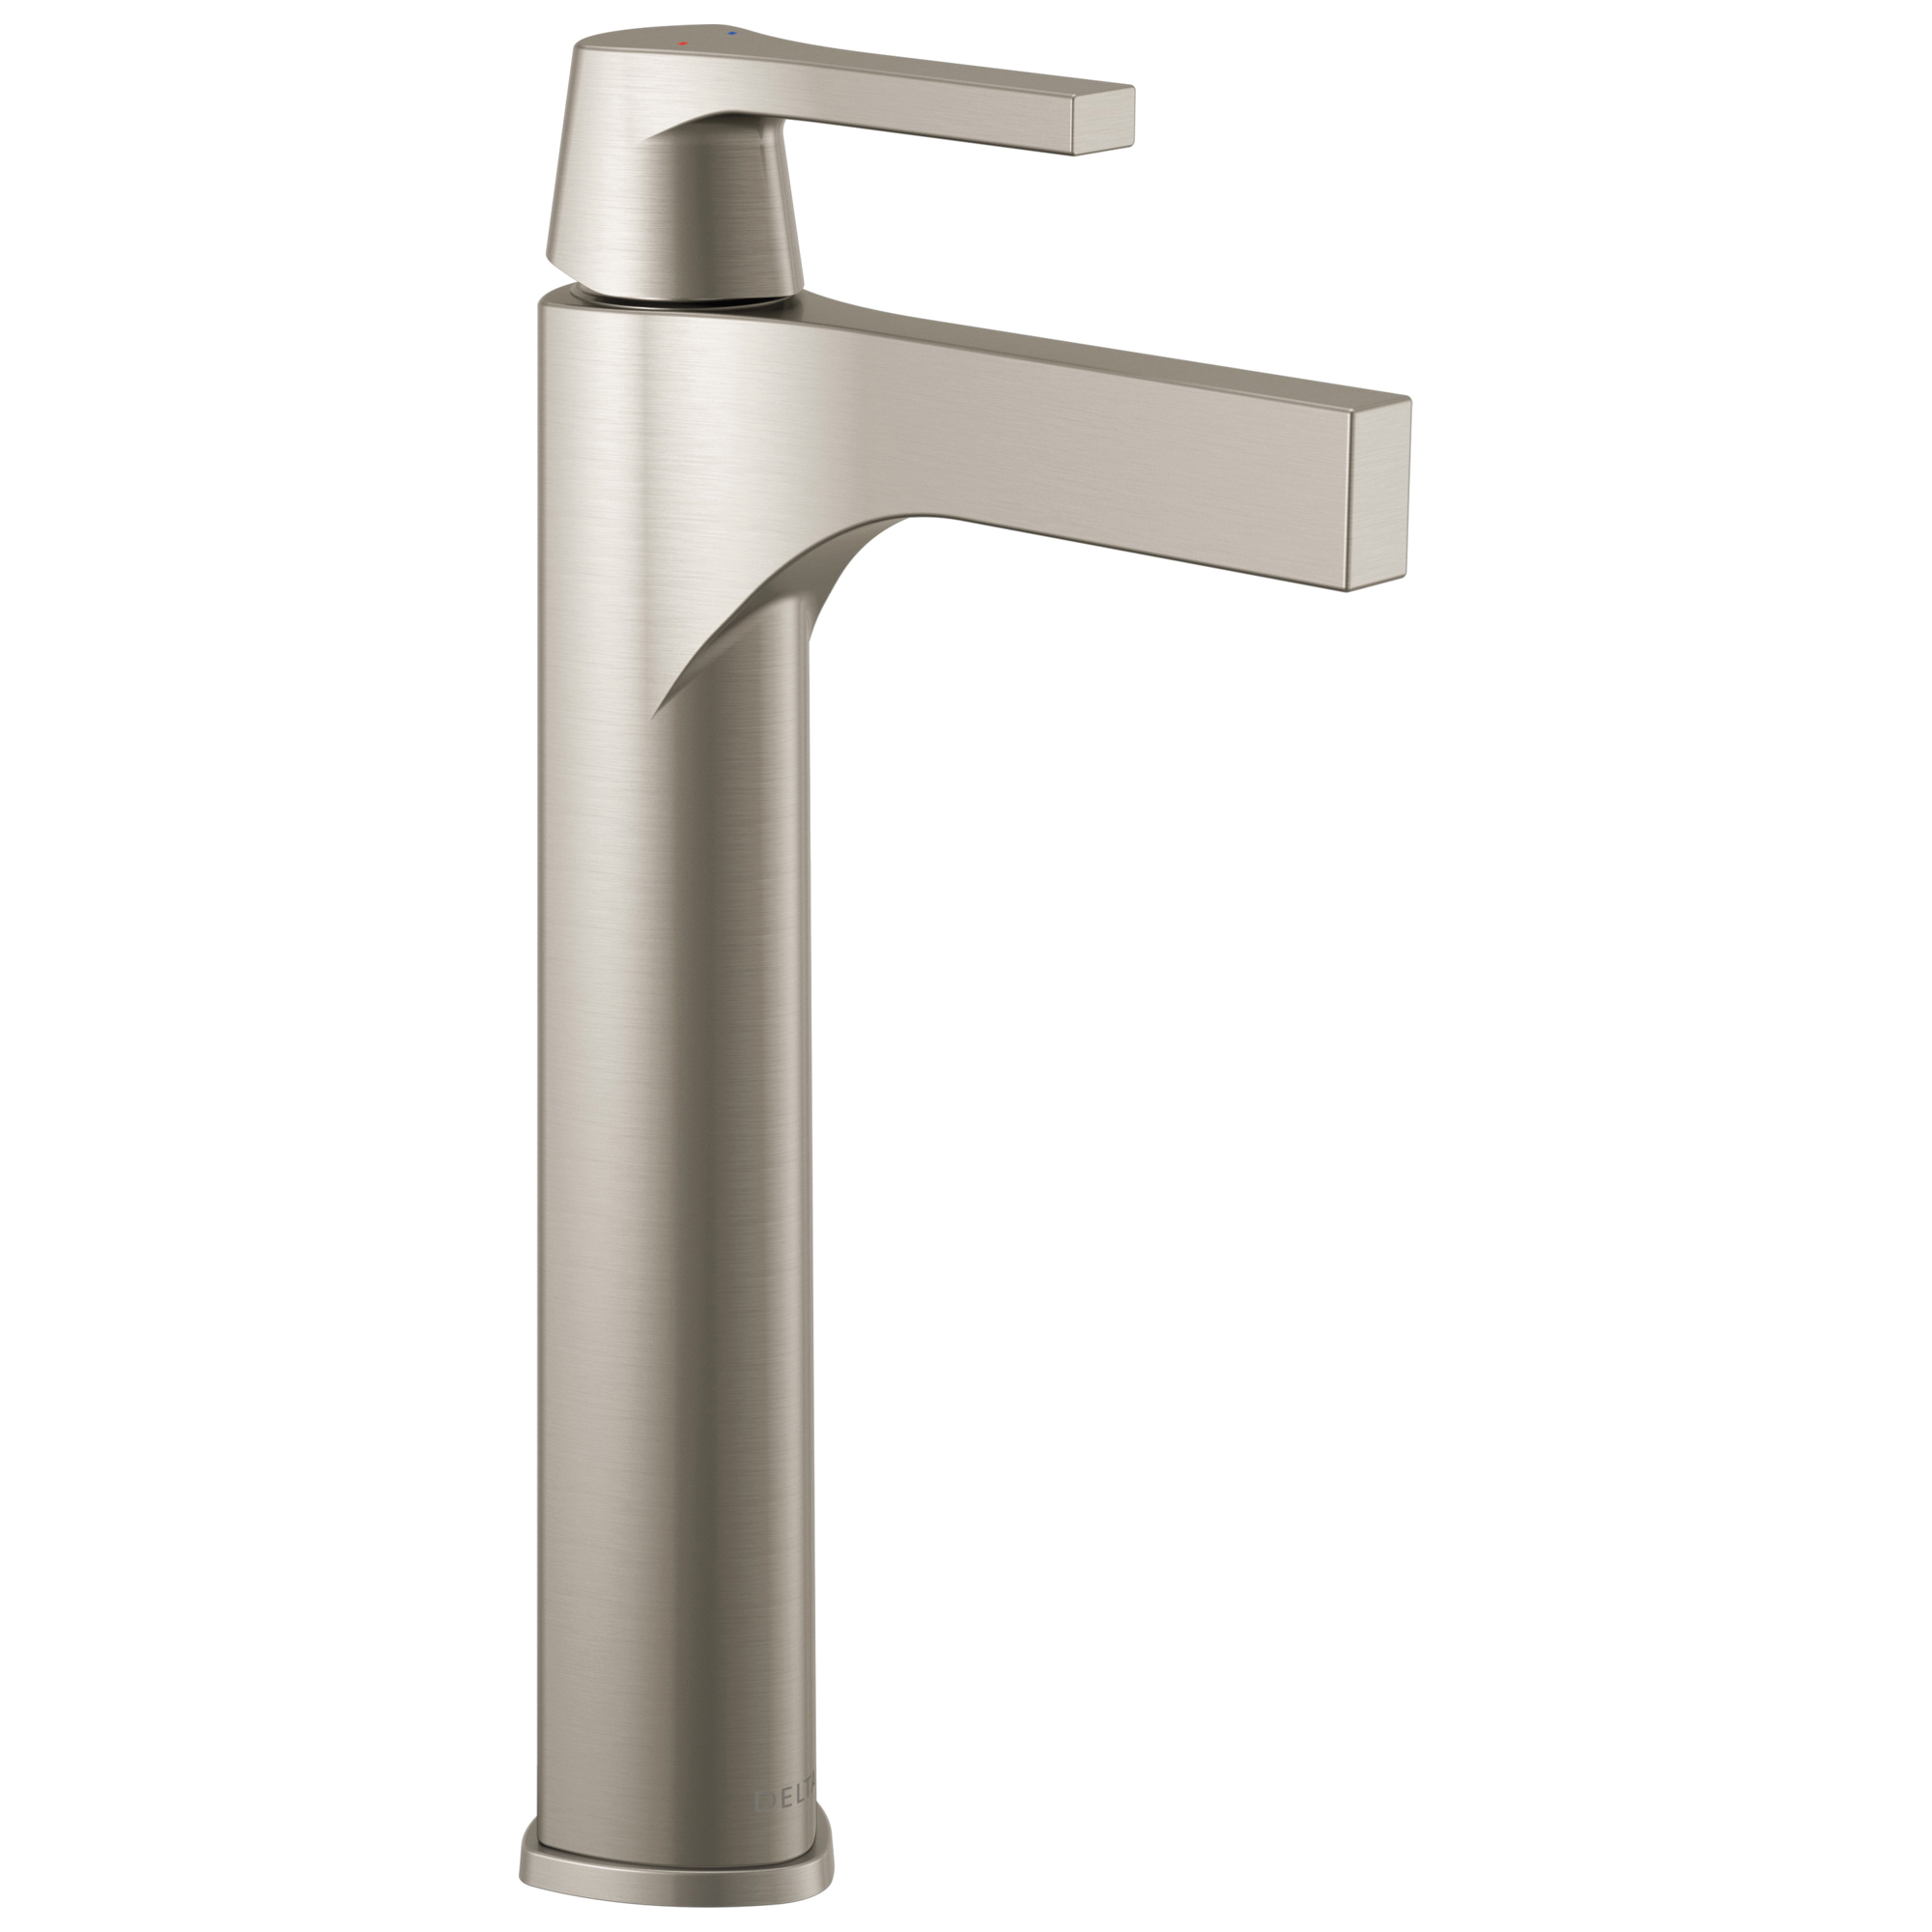 DELTA® 774-SS-DST Zura™ Vessel Lavatory Faucet, Commercial, 5 in Spout, 9-15/16 in H Spout, Stainless Steel, 1 Handles, Domestic